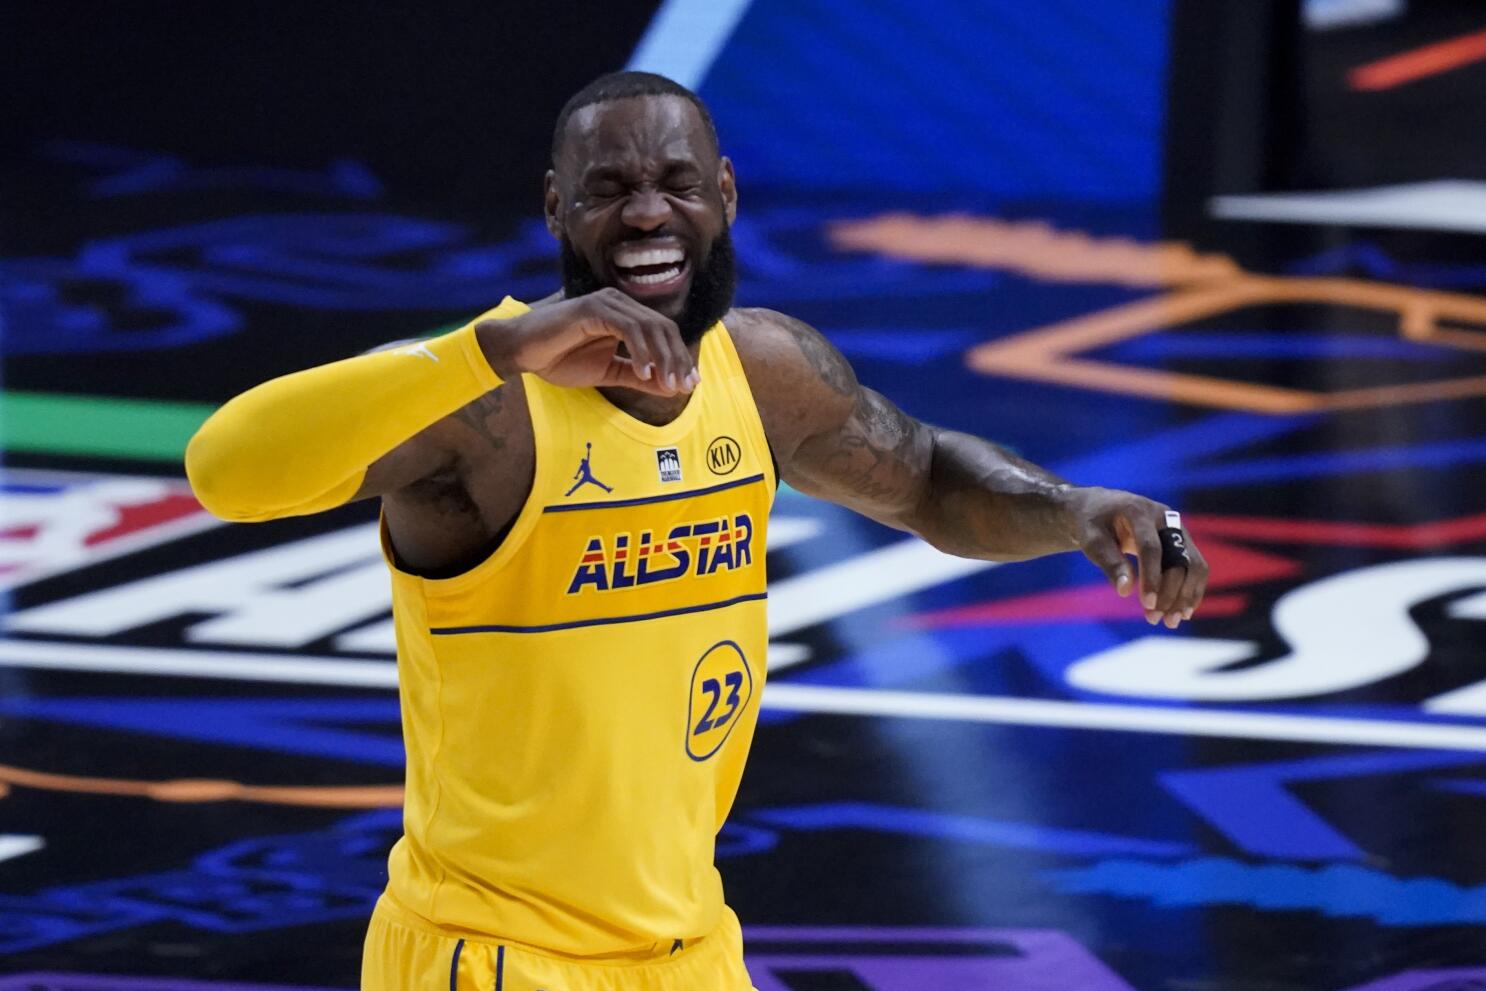 LeBron James leads NBA in jersey sales, Curry second. Lakers lead